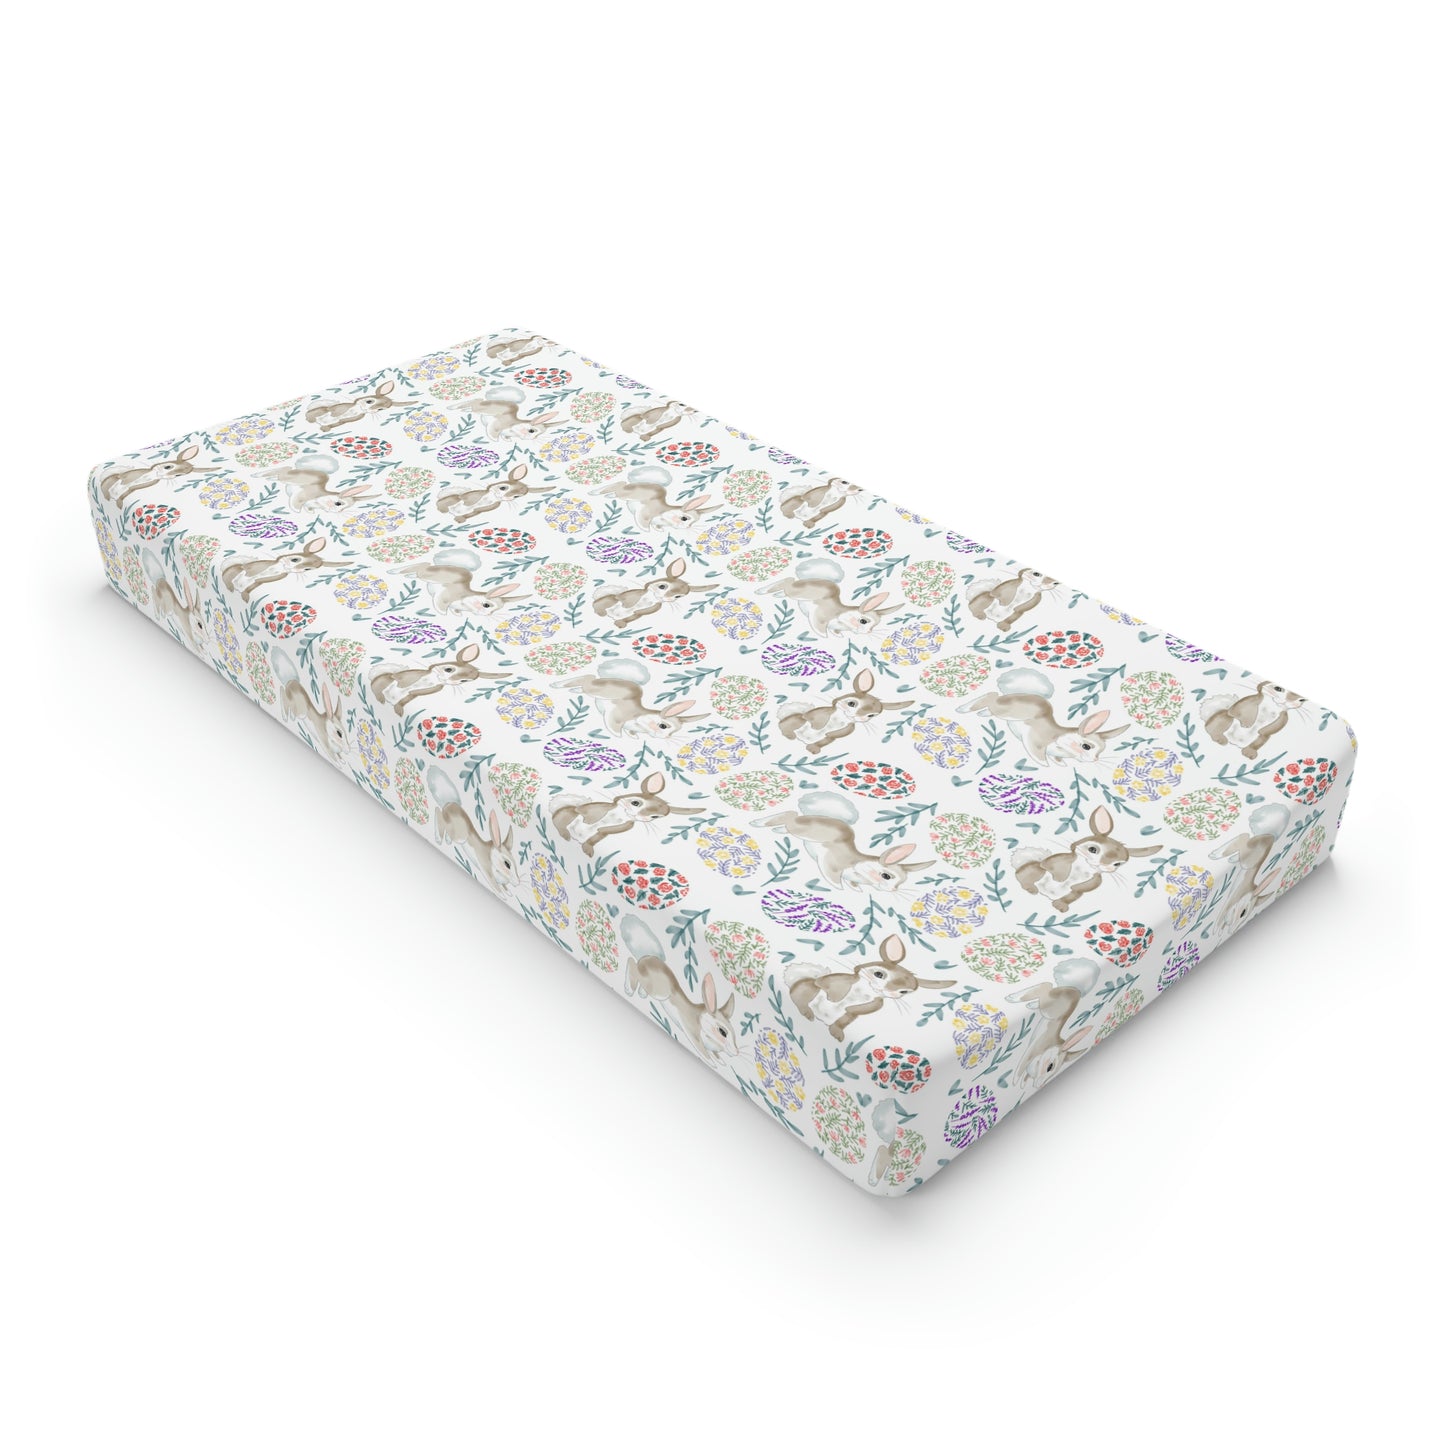 Bunnies and Easter Eggs Baby Changing Pad Cover